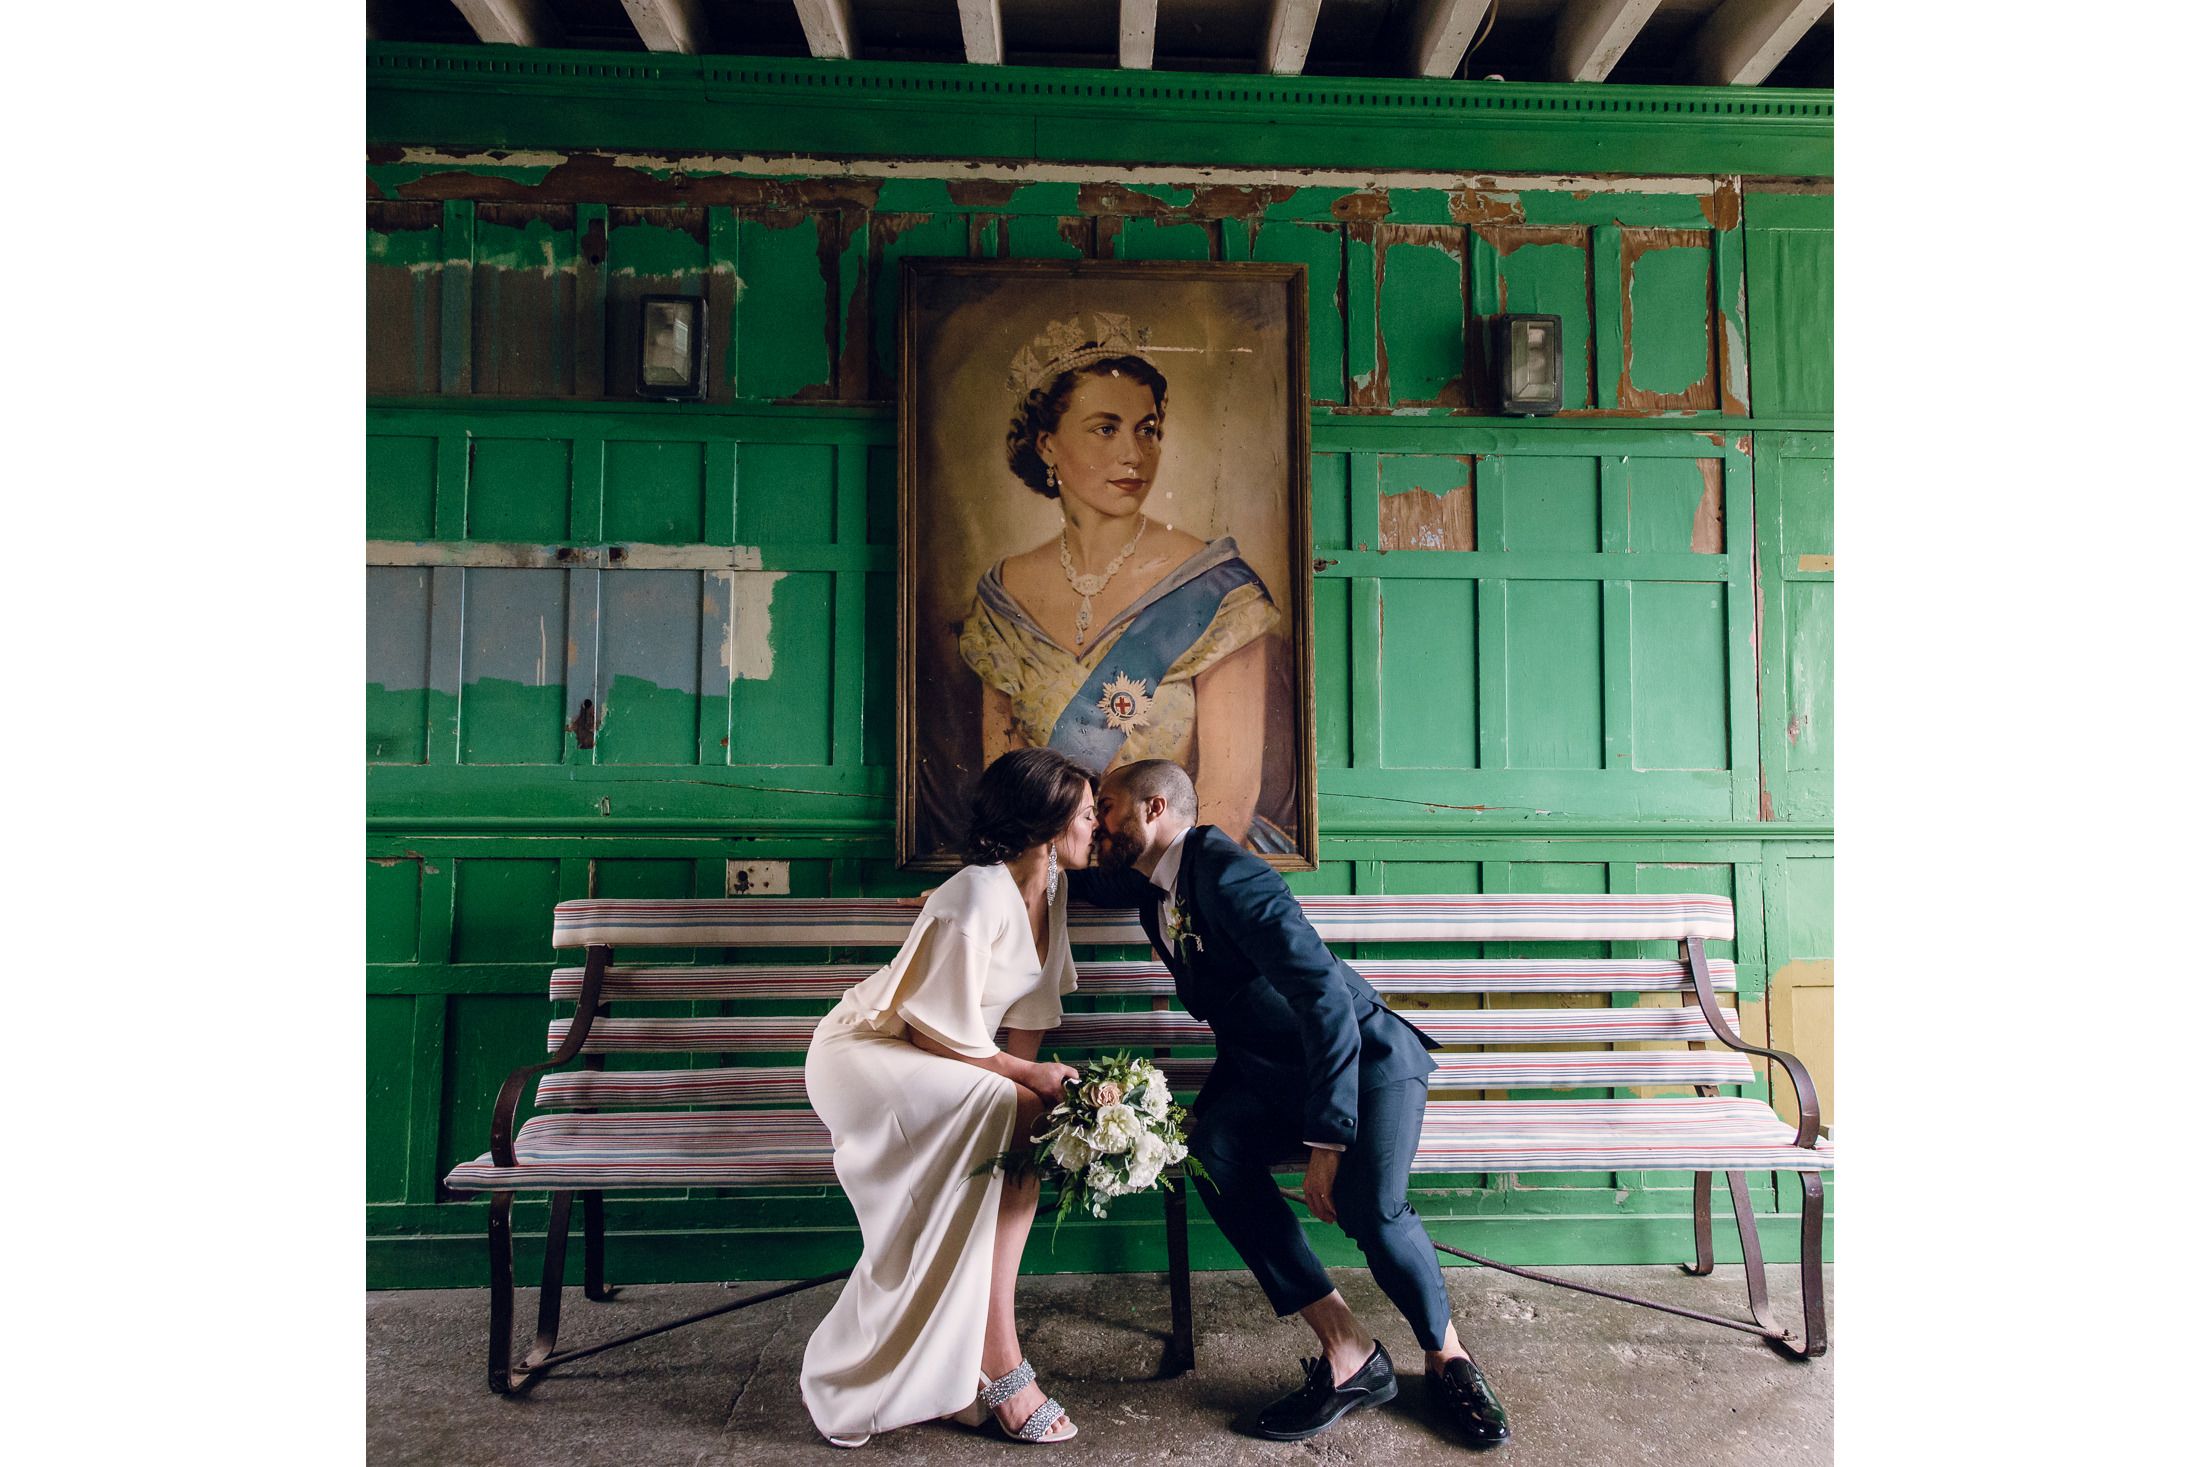 Bride and Groom Kissing on a bench in London